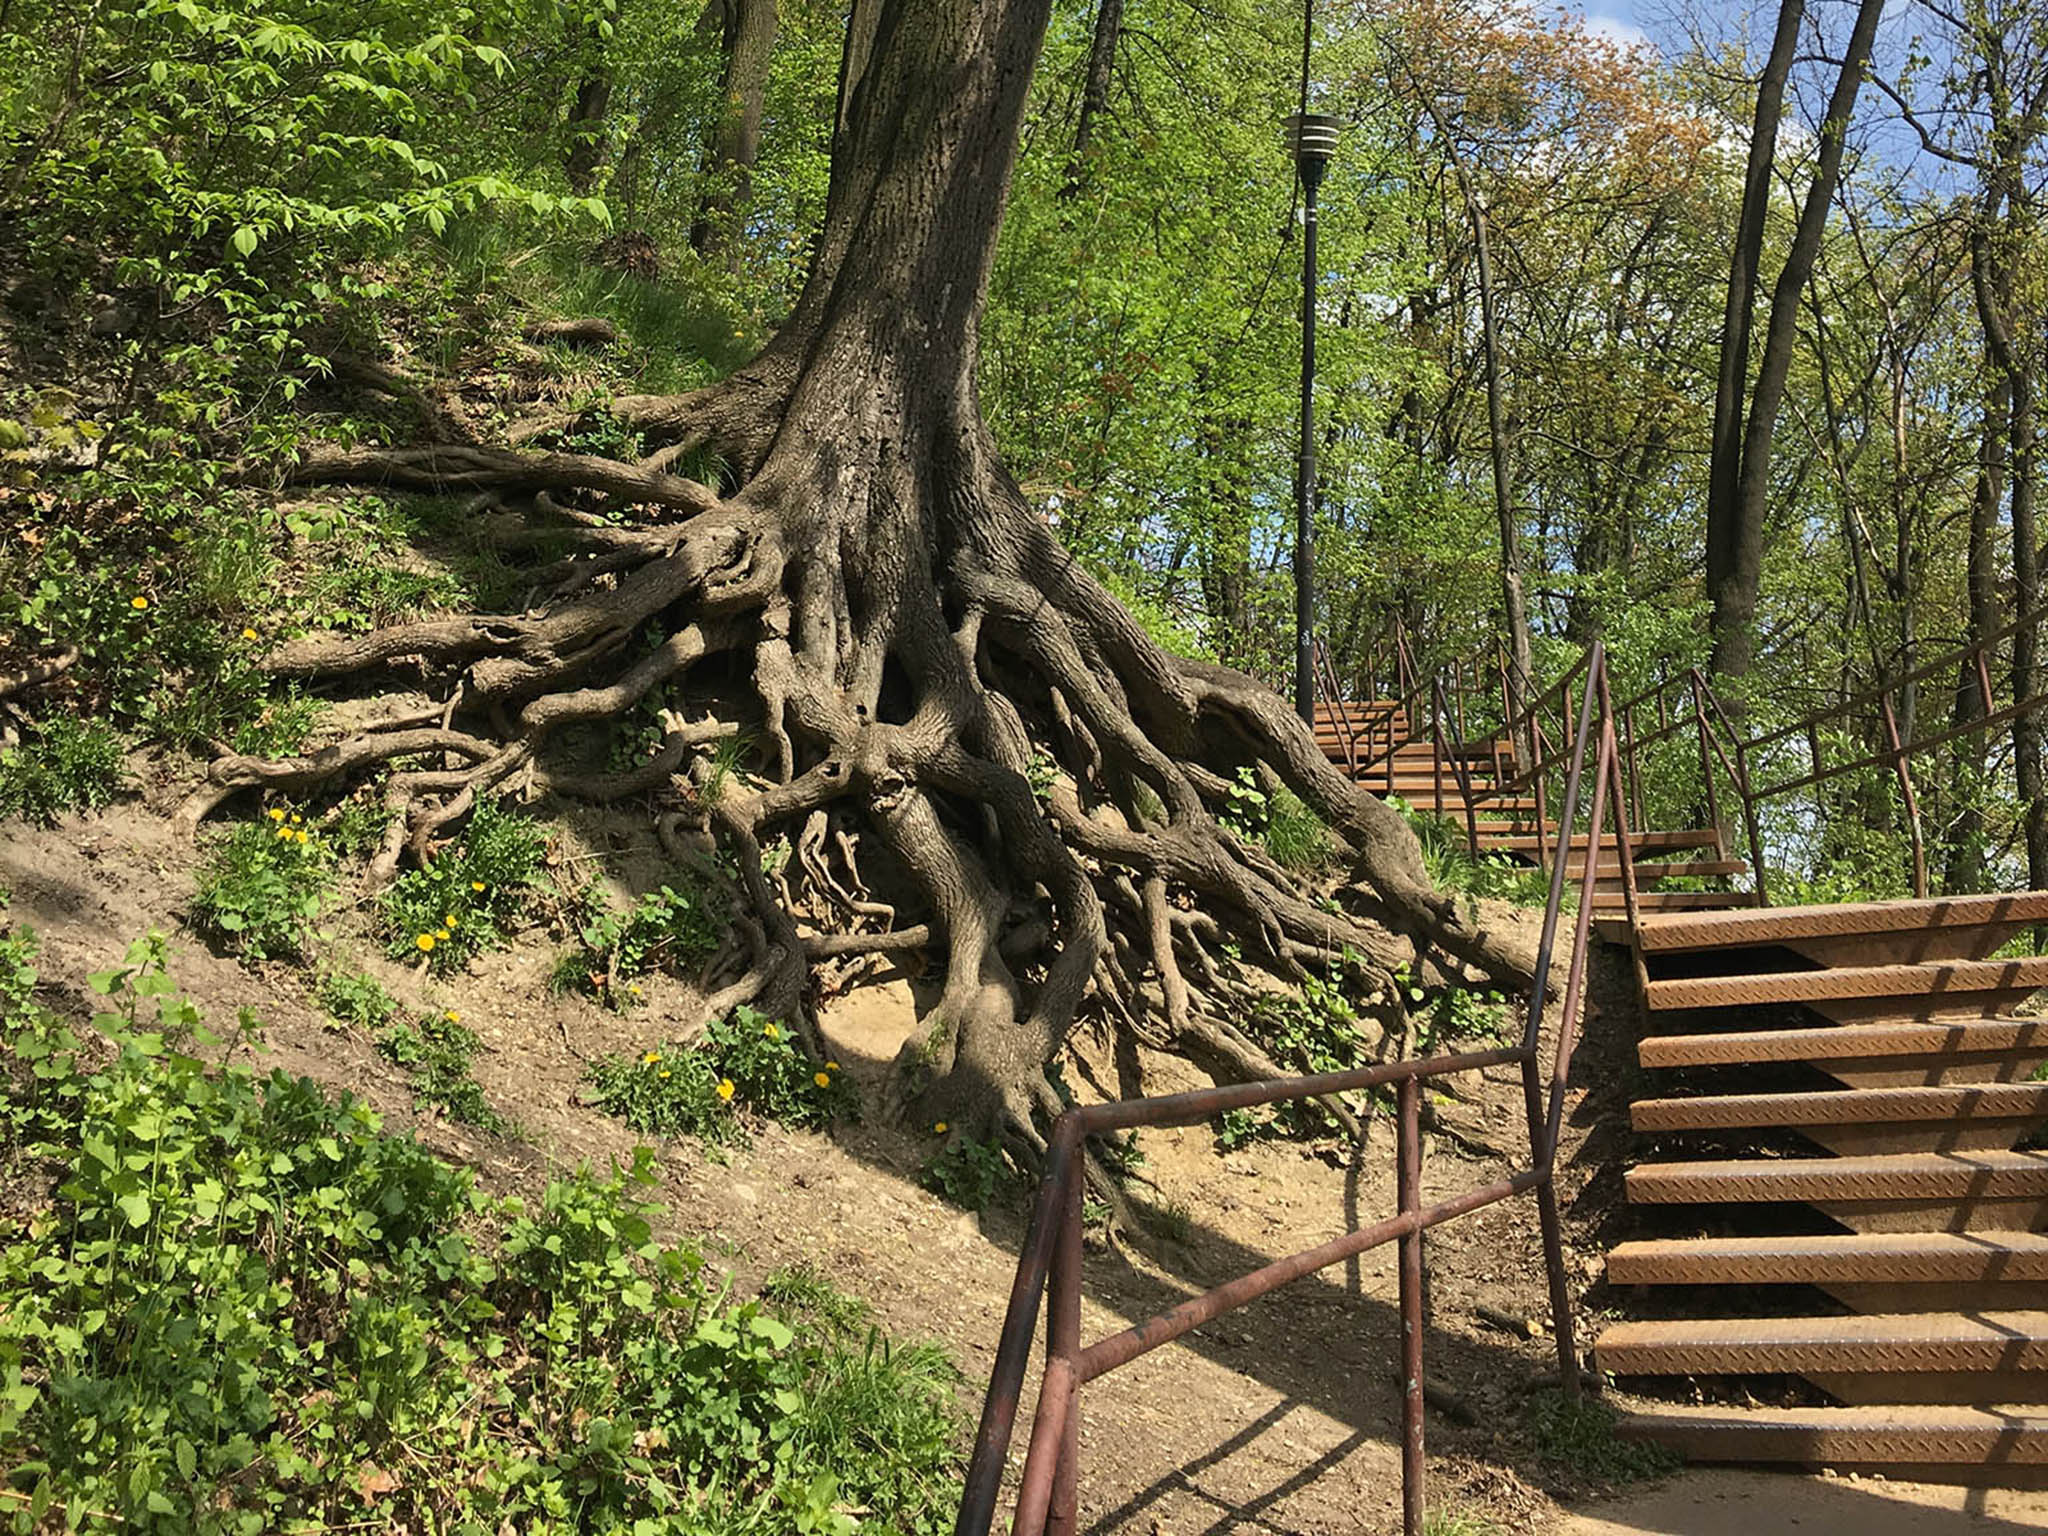 The start of the path up to High Castle begins with rusted old steps